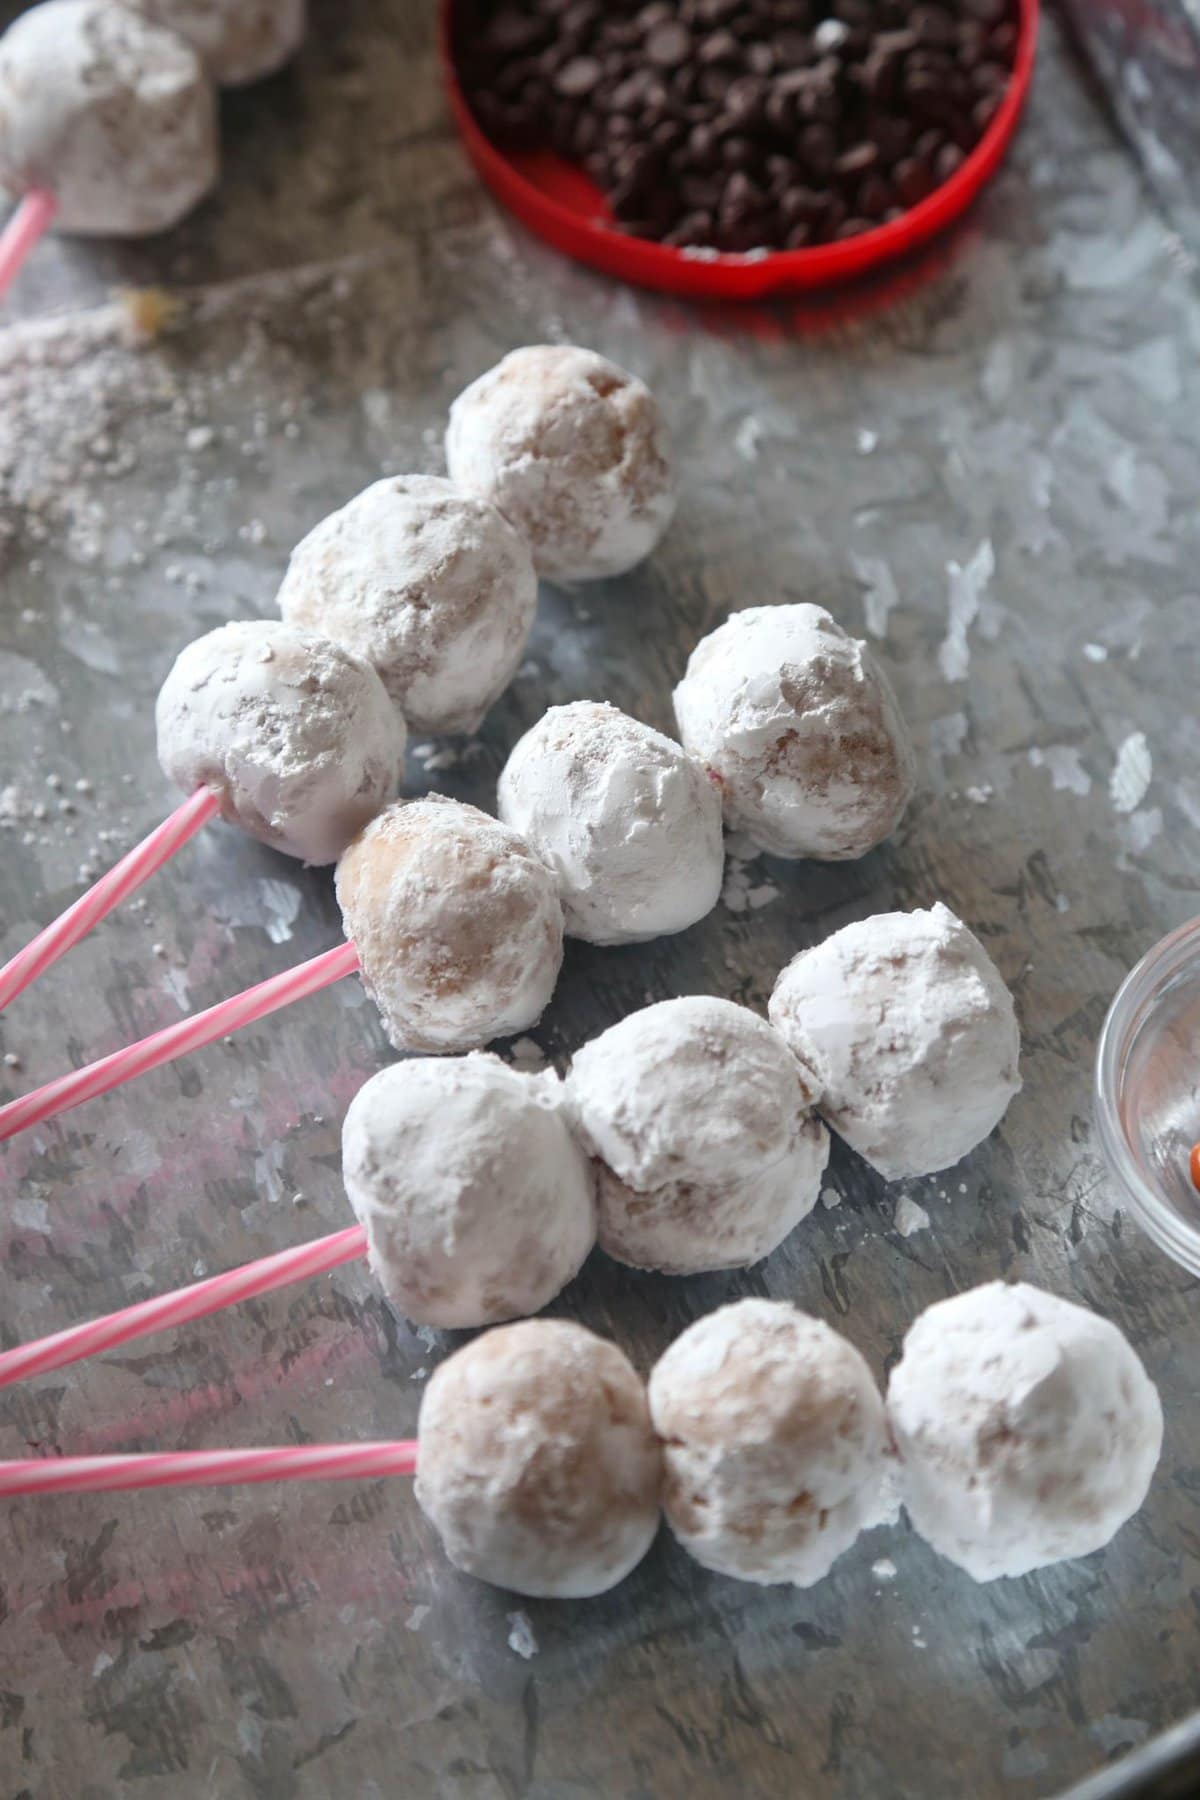 Powdered donut holes on a straw